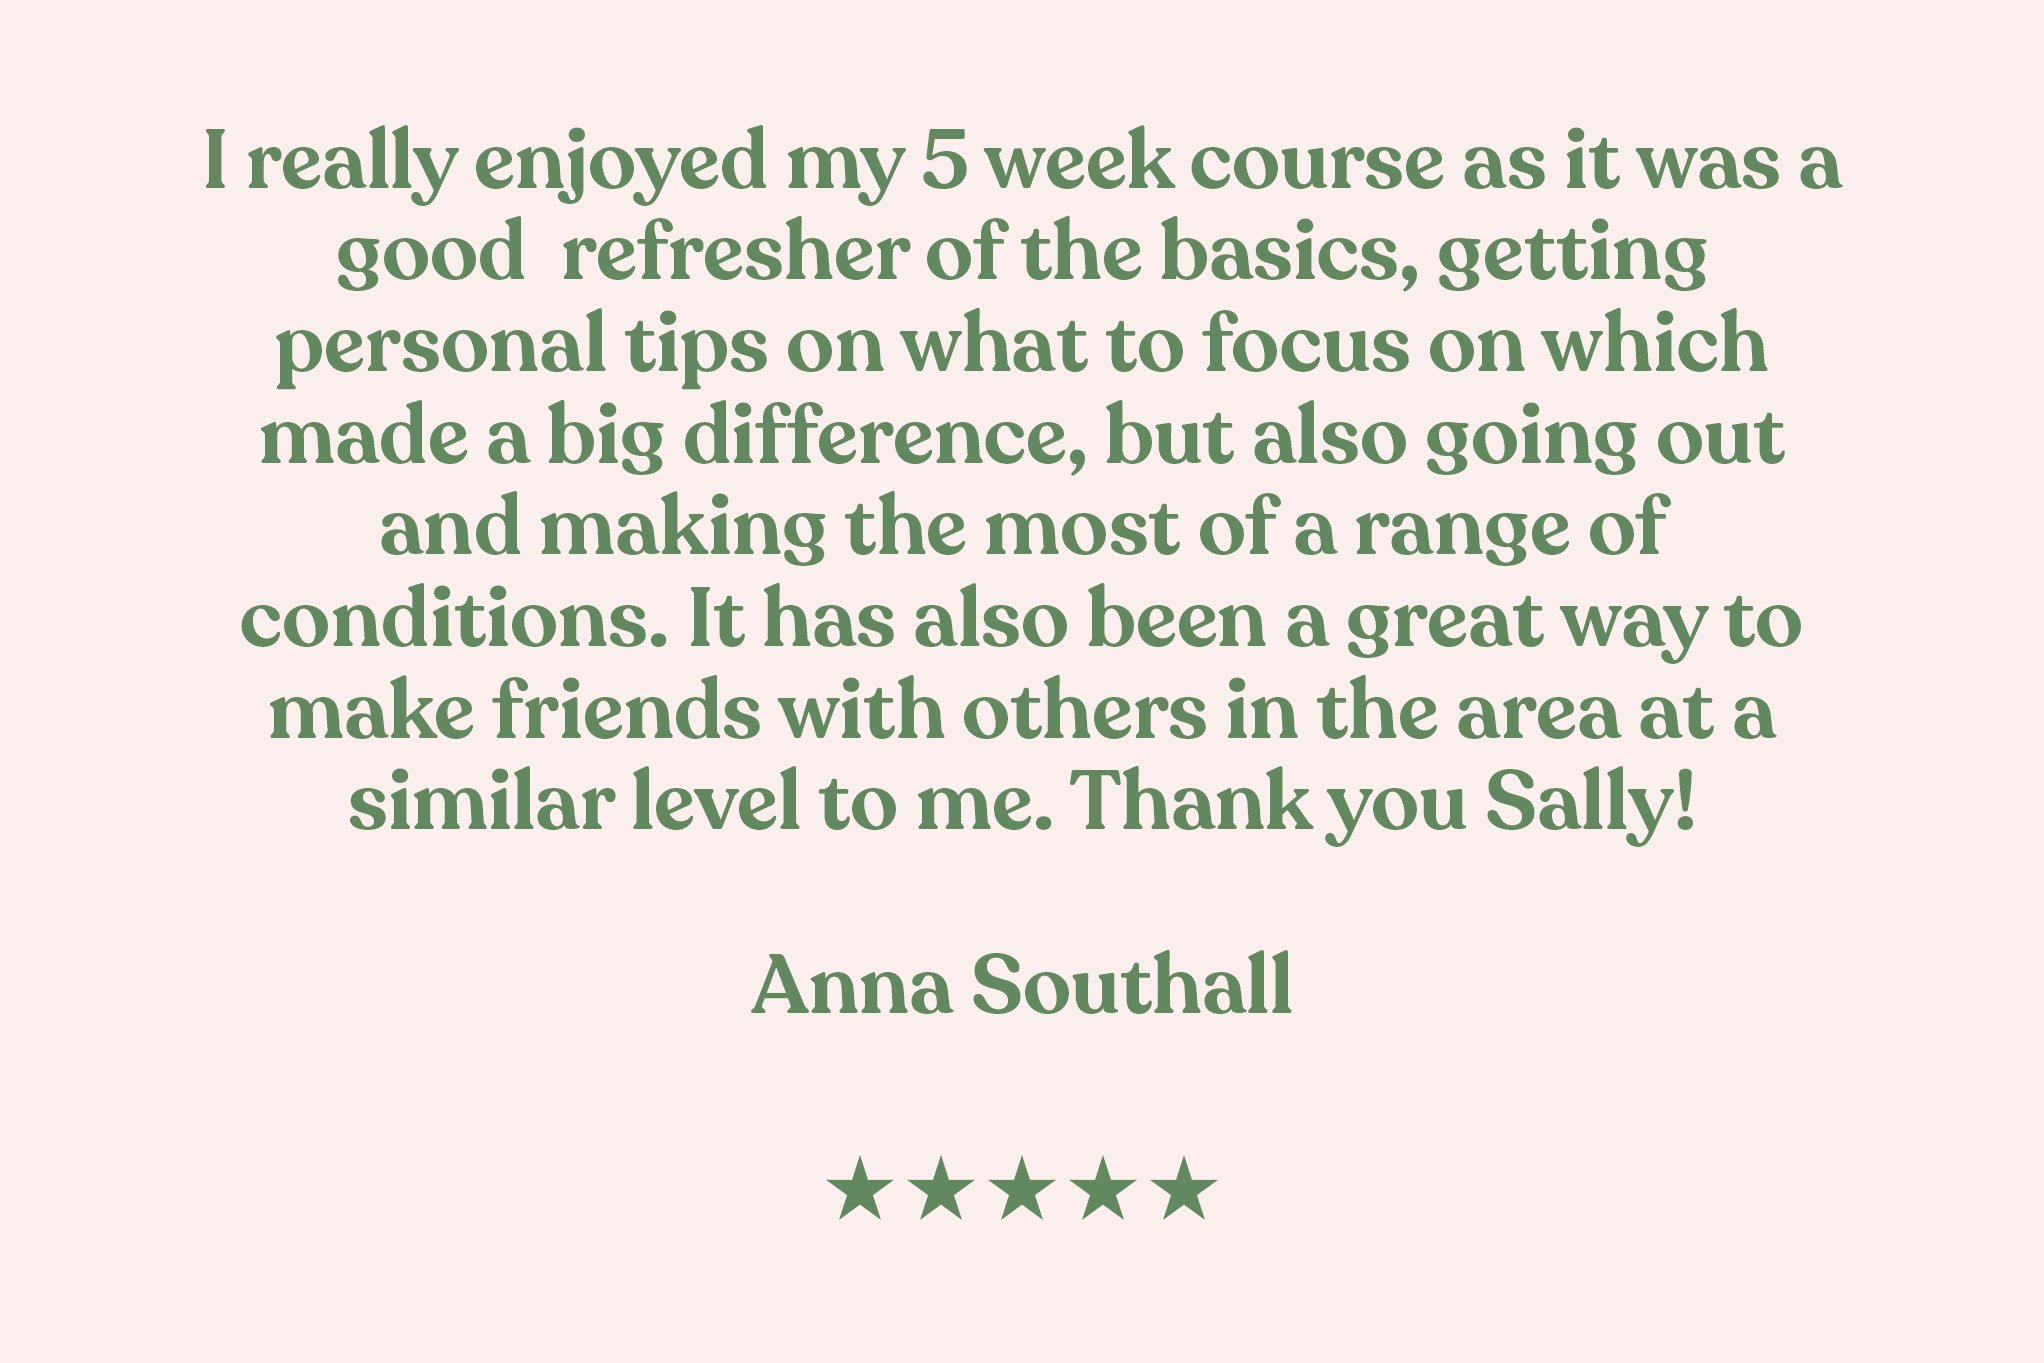 Anna Southall review.jpg